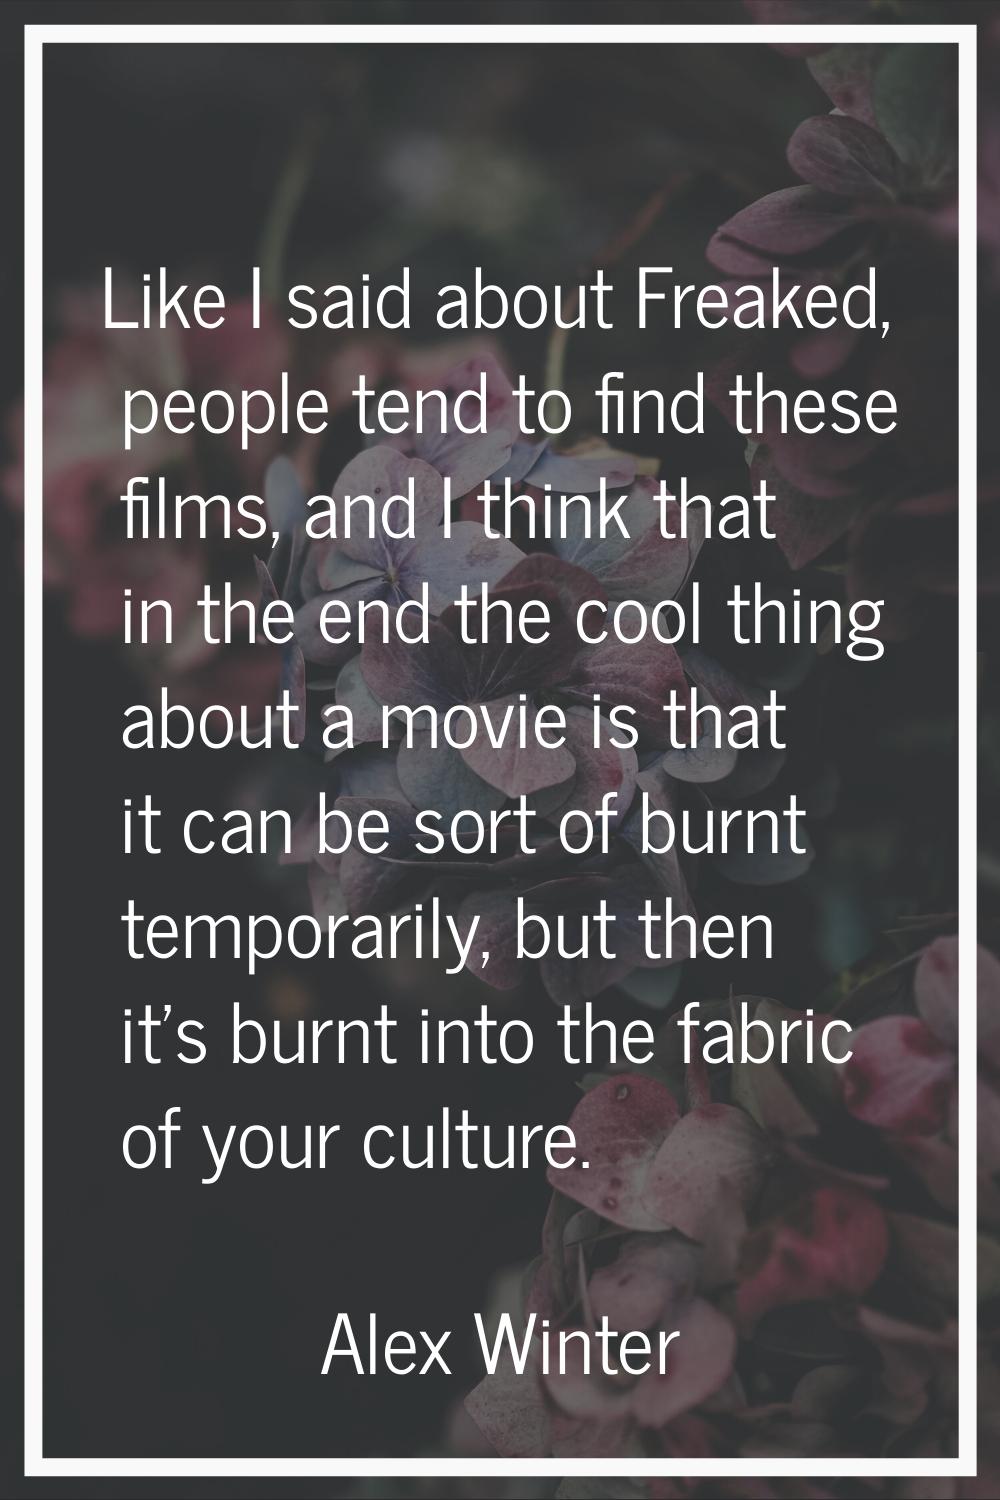 Like I said about Freaked, people tend to find these films, and I think that in the end the cool th